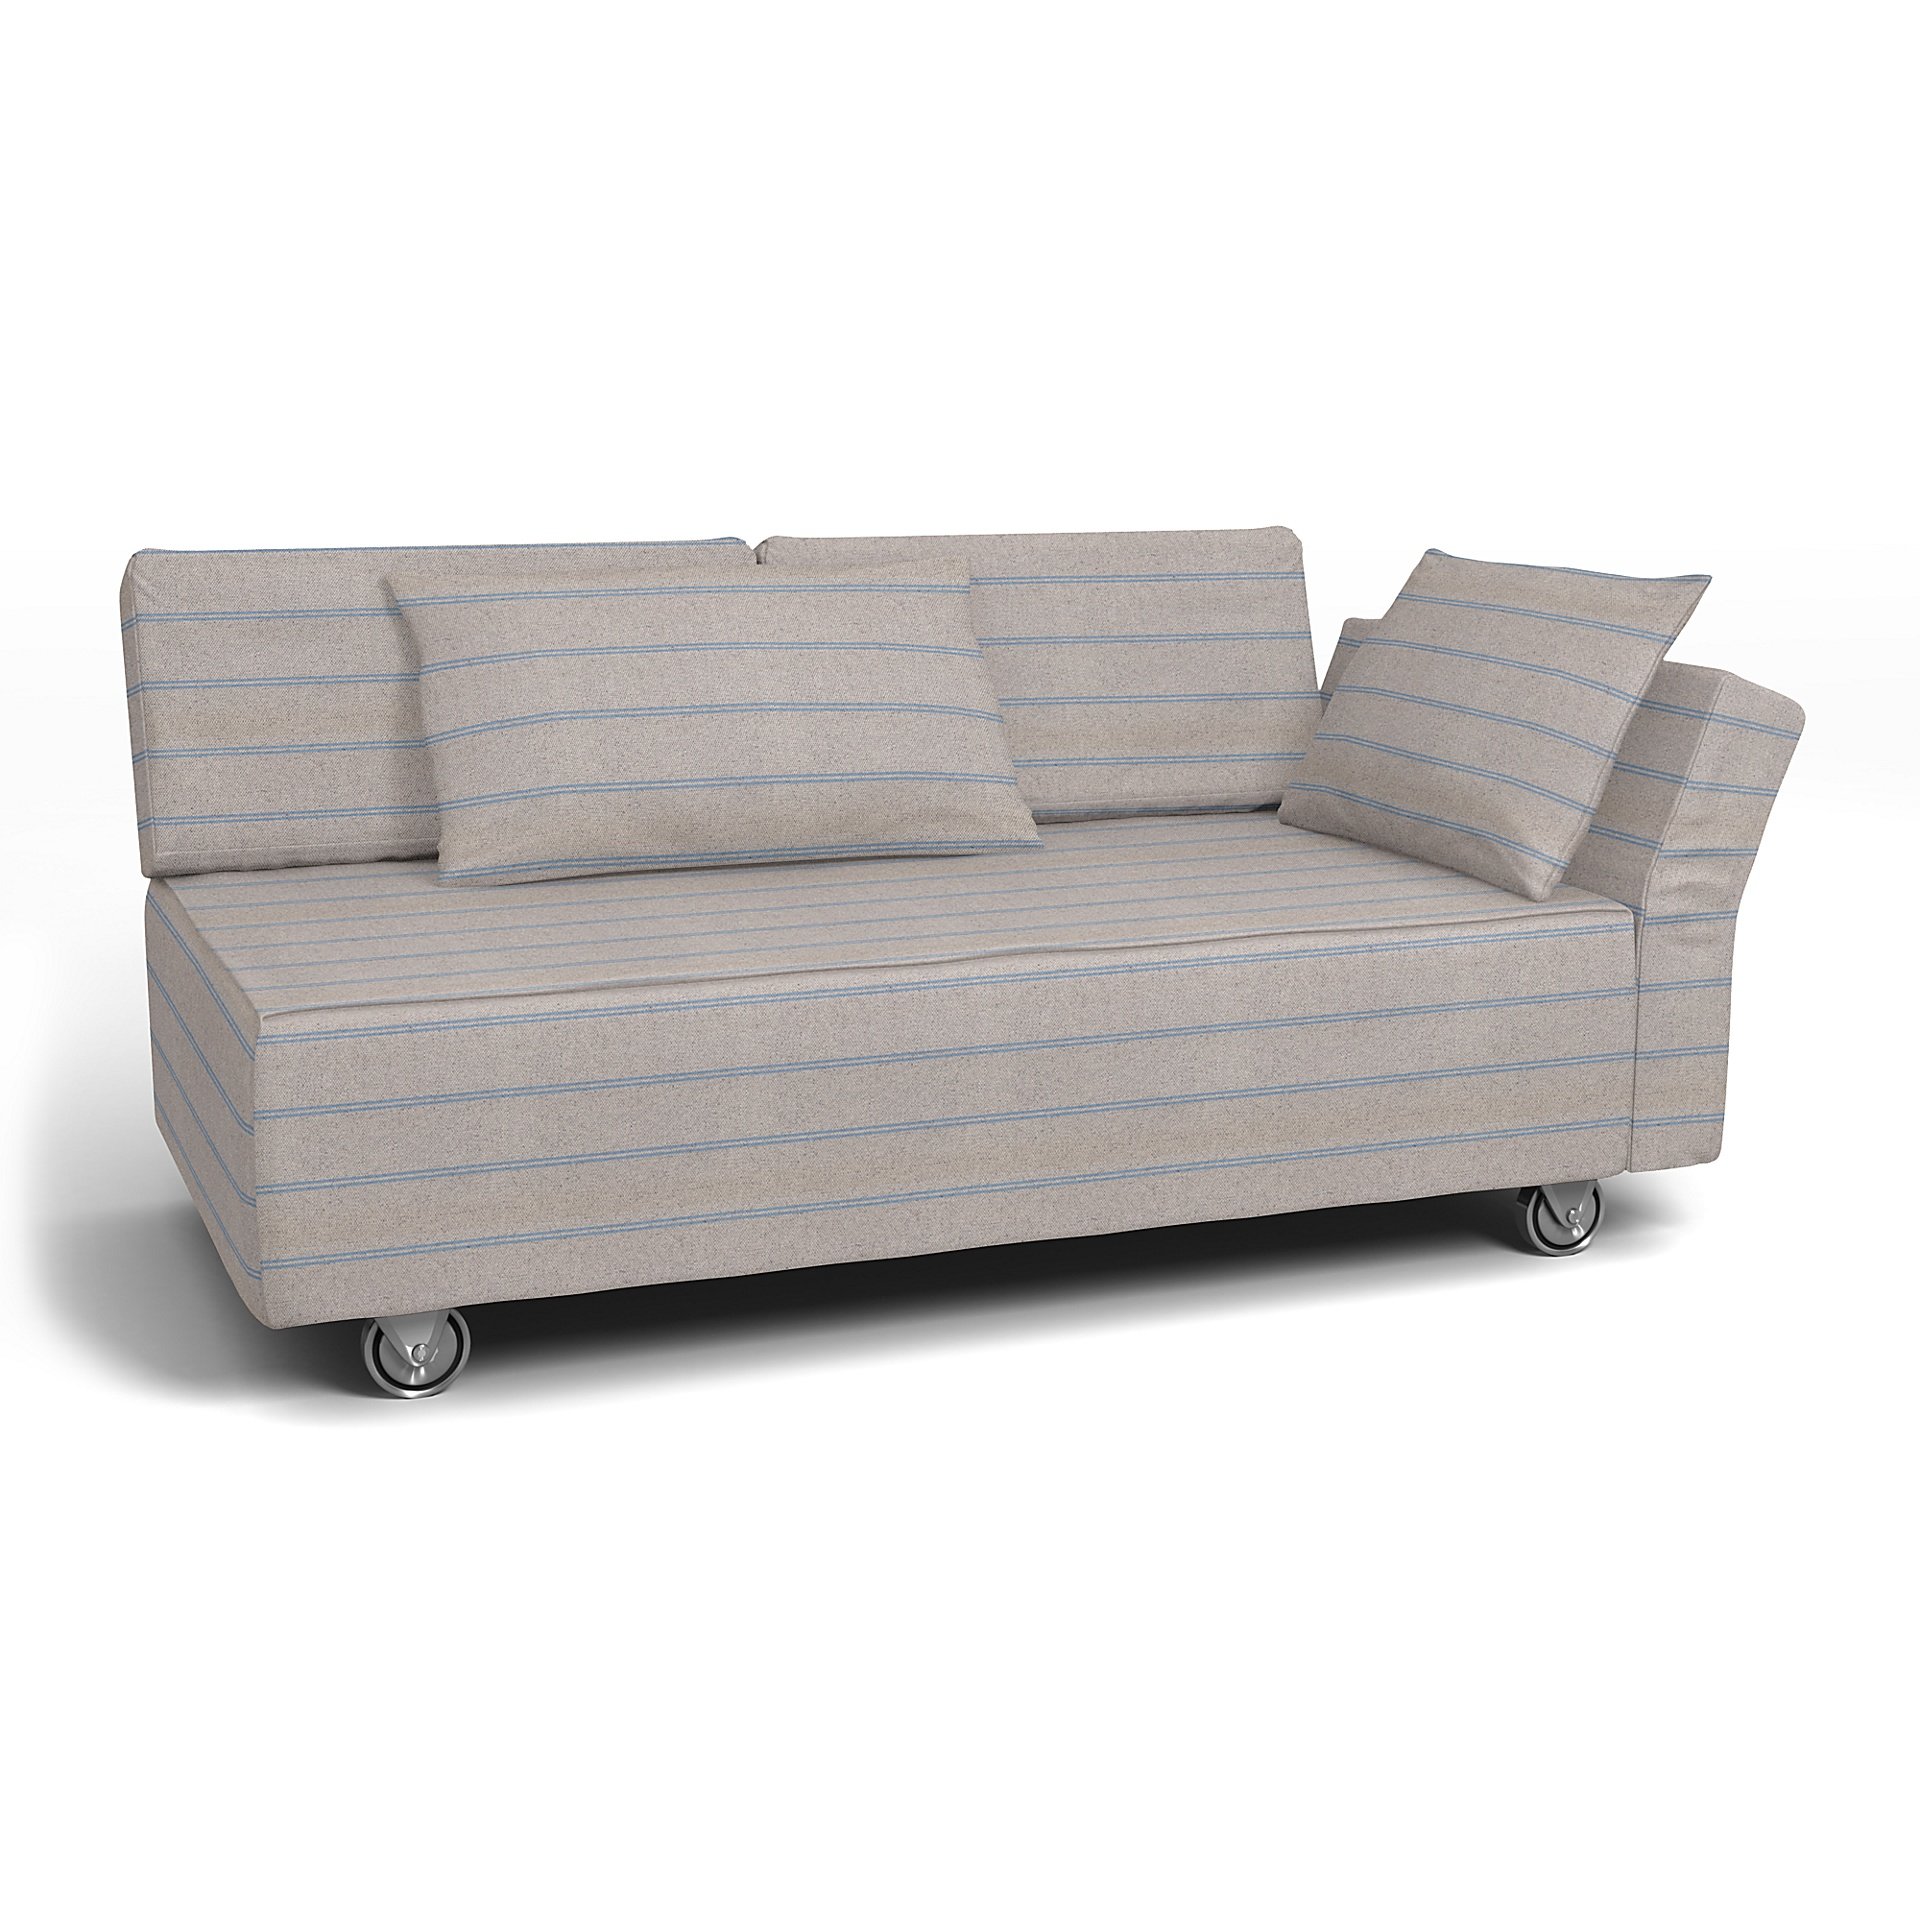 IKEA - Falsterbo 2 Seat Sofa with Right Arm Cover, Blue Stripe, Cotton - Bemz